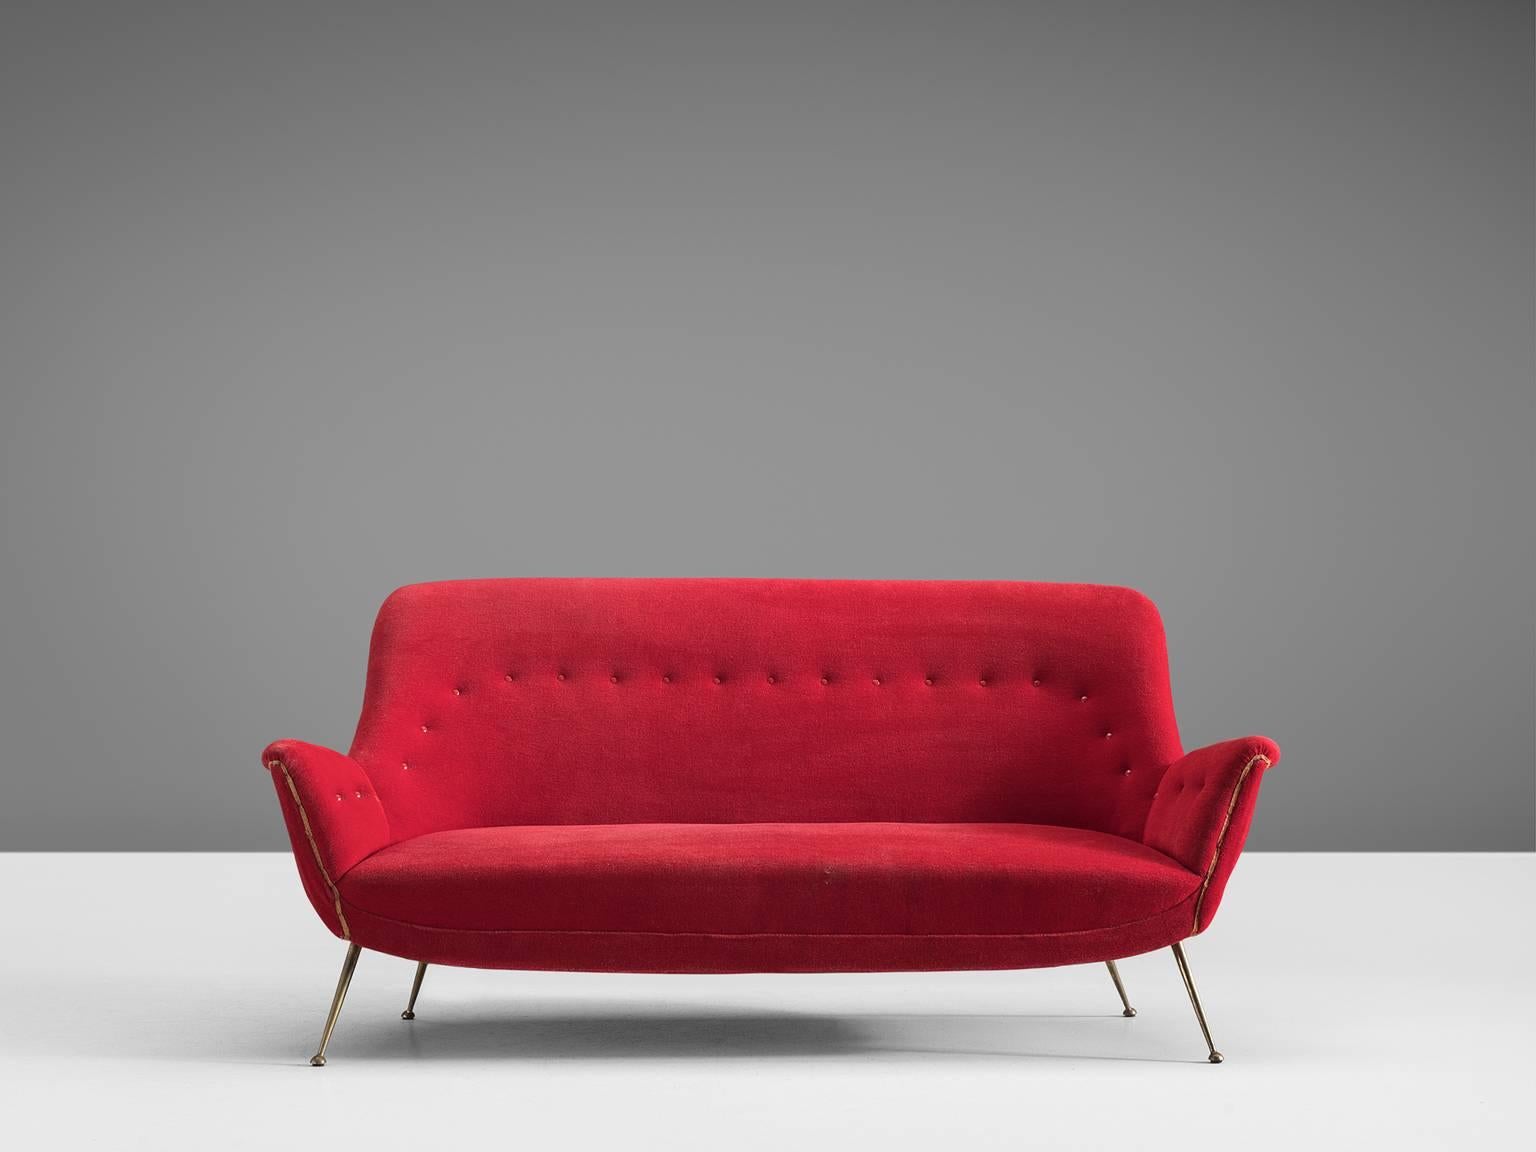 Gorgeous Venetian red Italian sofa original from the 1950s.

This sofa is an iconic example of Italian design from the 1950s. Organic and sculptural, this two-and-a-half-seat sofa is anything but minimalistic. Equipped with the original stiletto